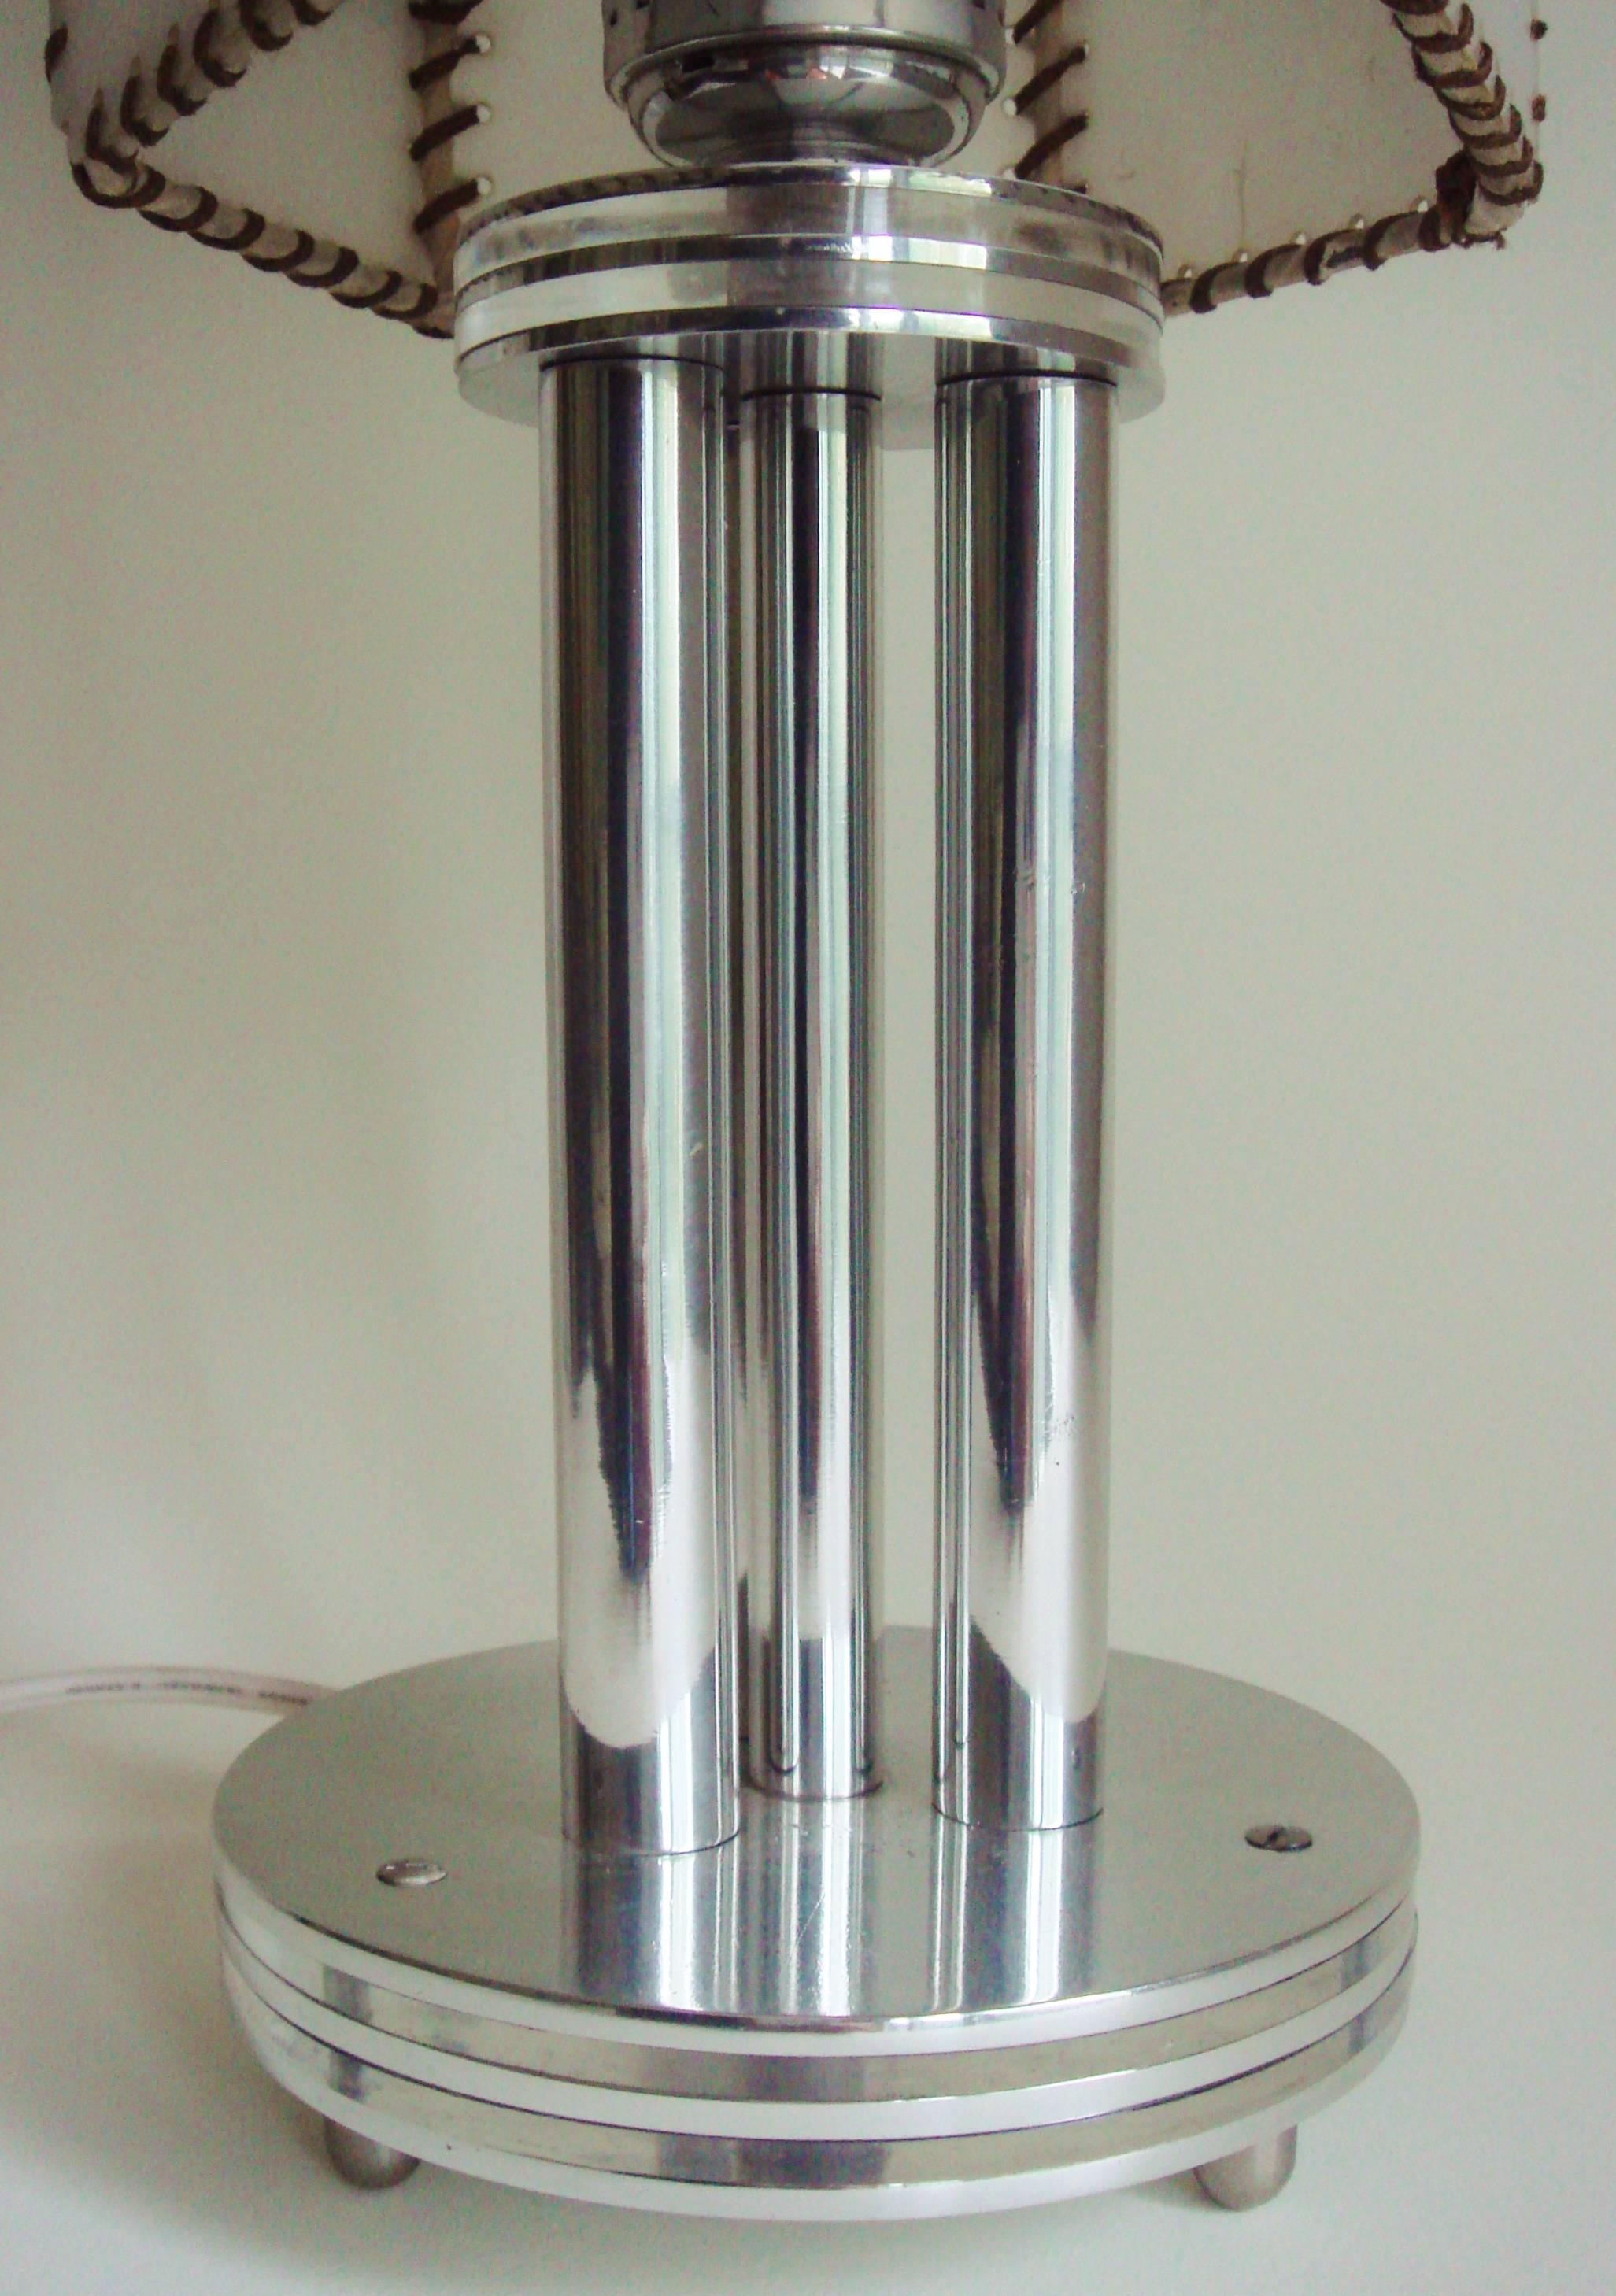 This American Art Deco/Machine Age table lamp features a circular disk base composed of two layers of clear Lucite sandwiched between three layers of polished aluminum and stands on three rounded brushed aluminum feet. Rising up from this base is a